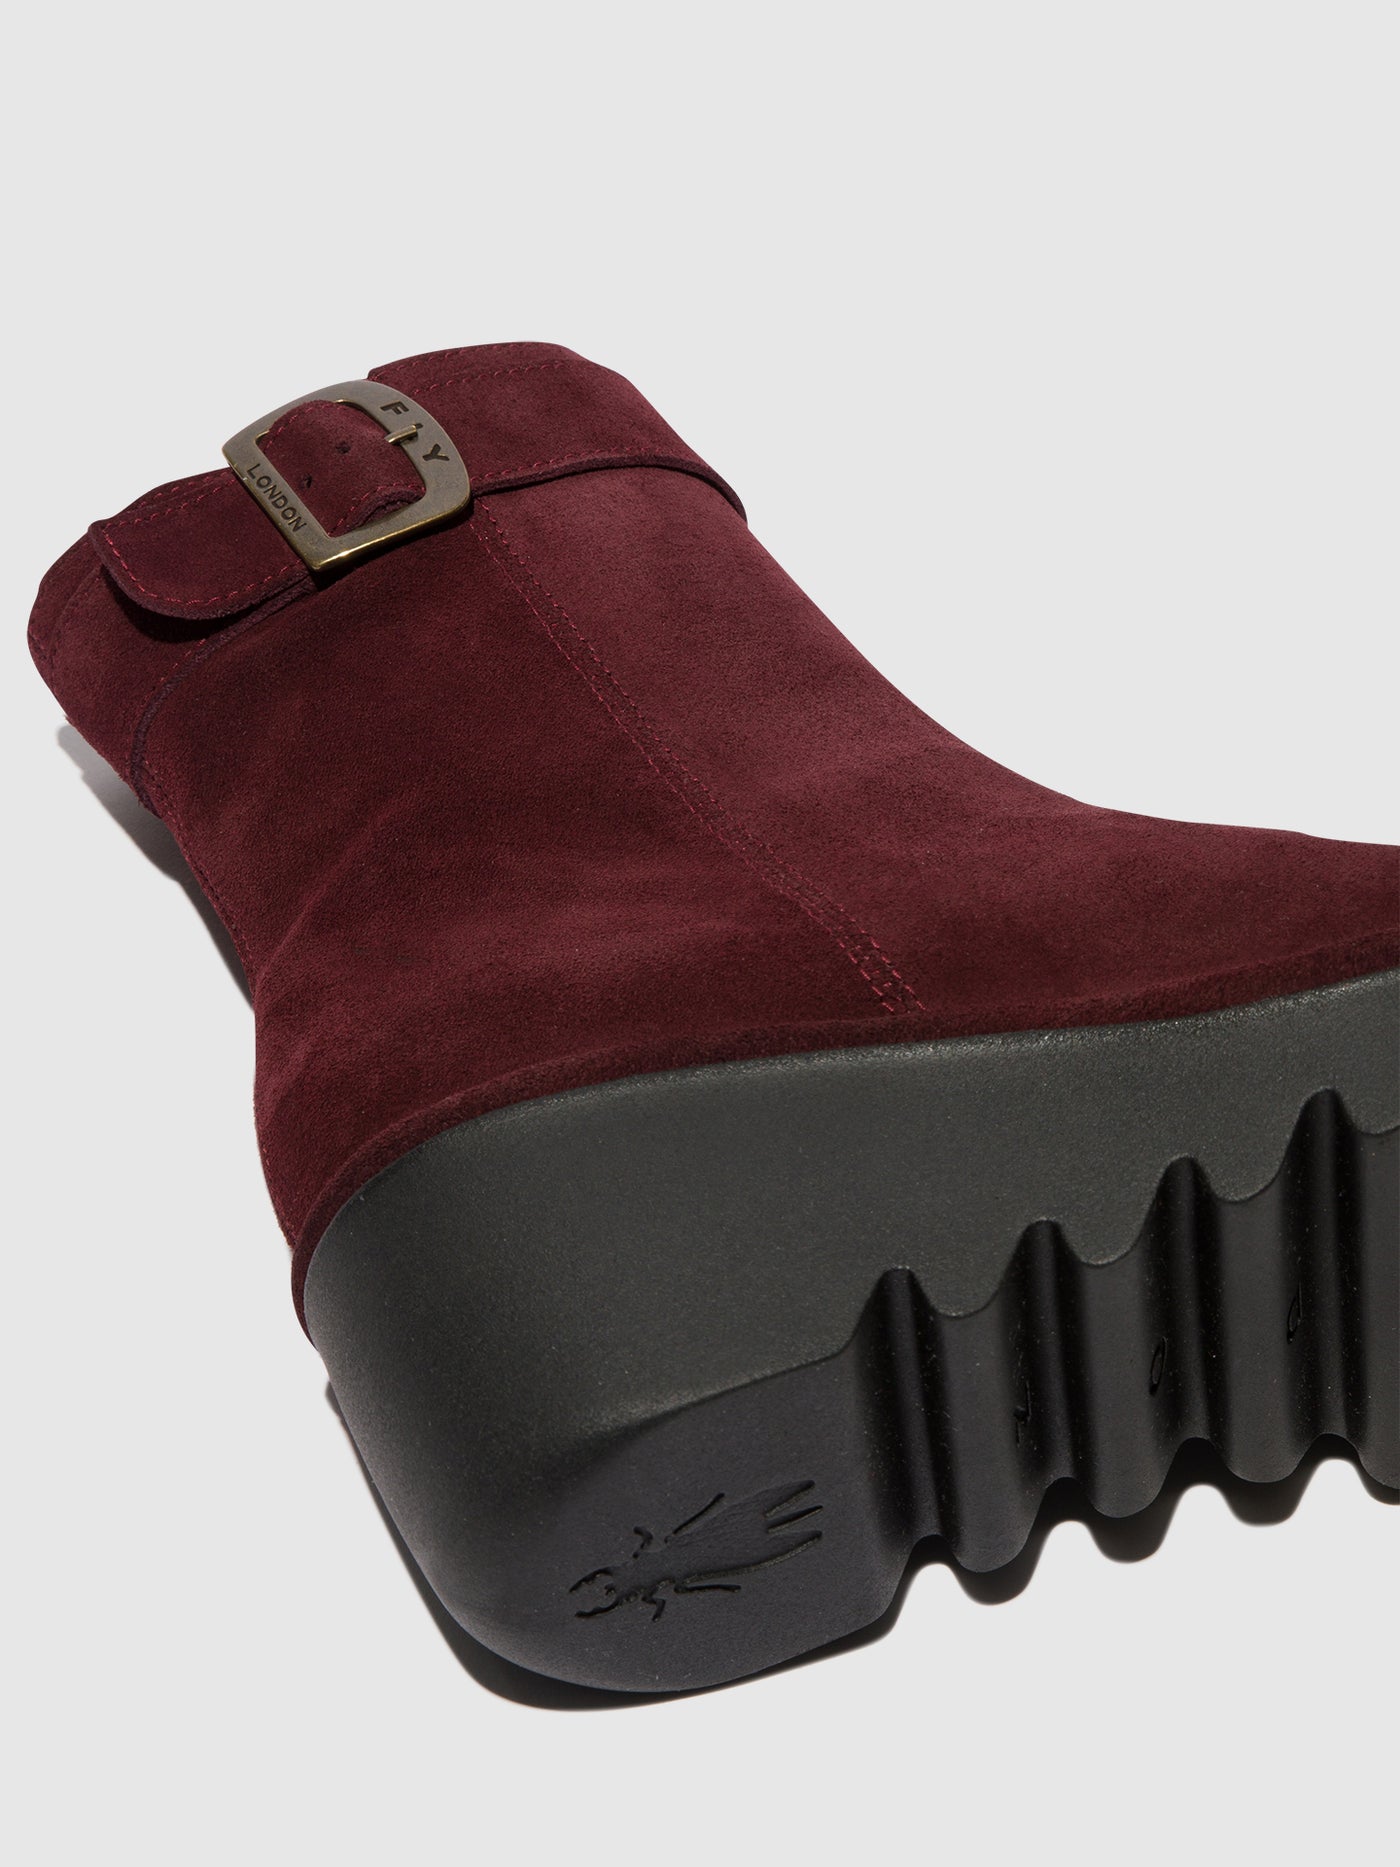 Zip Up Ankle Boots BEPP396FLY WINE